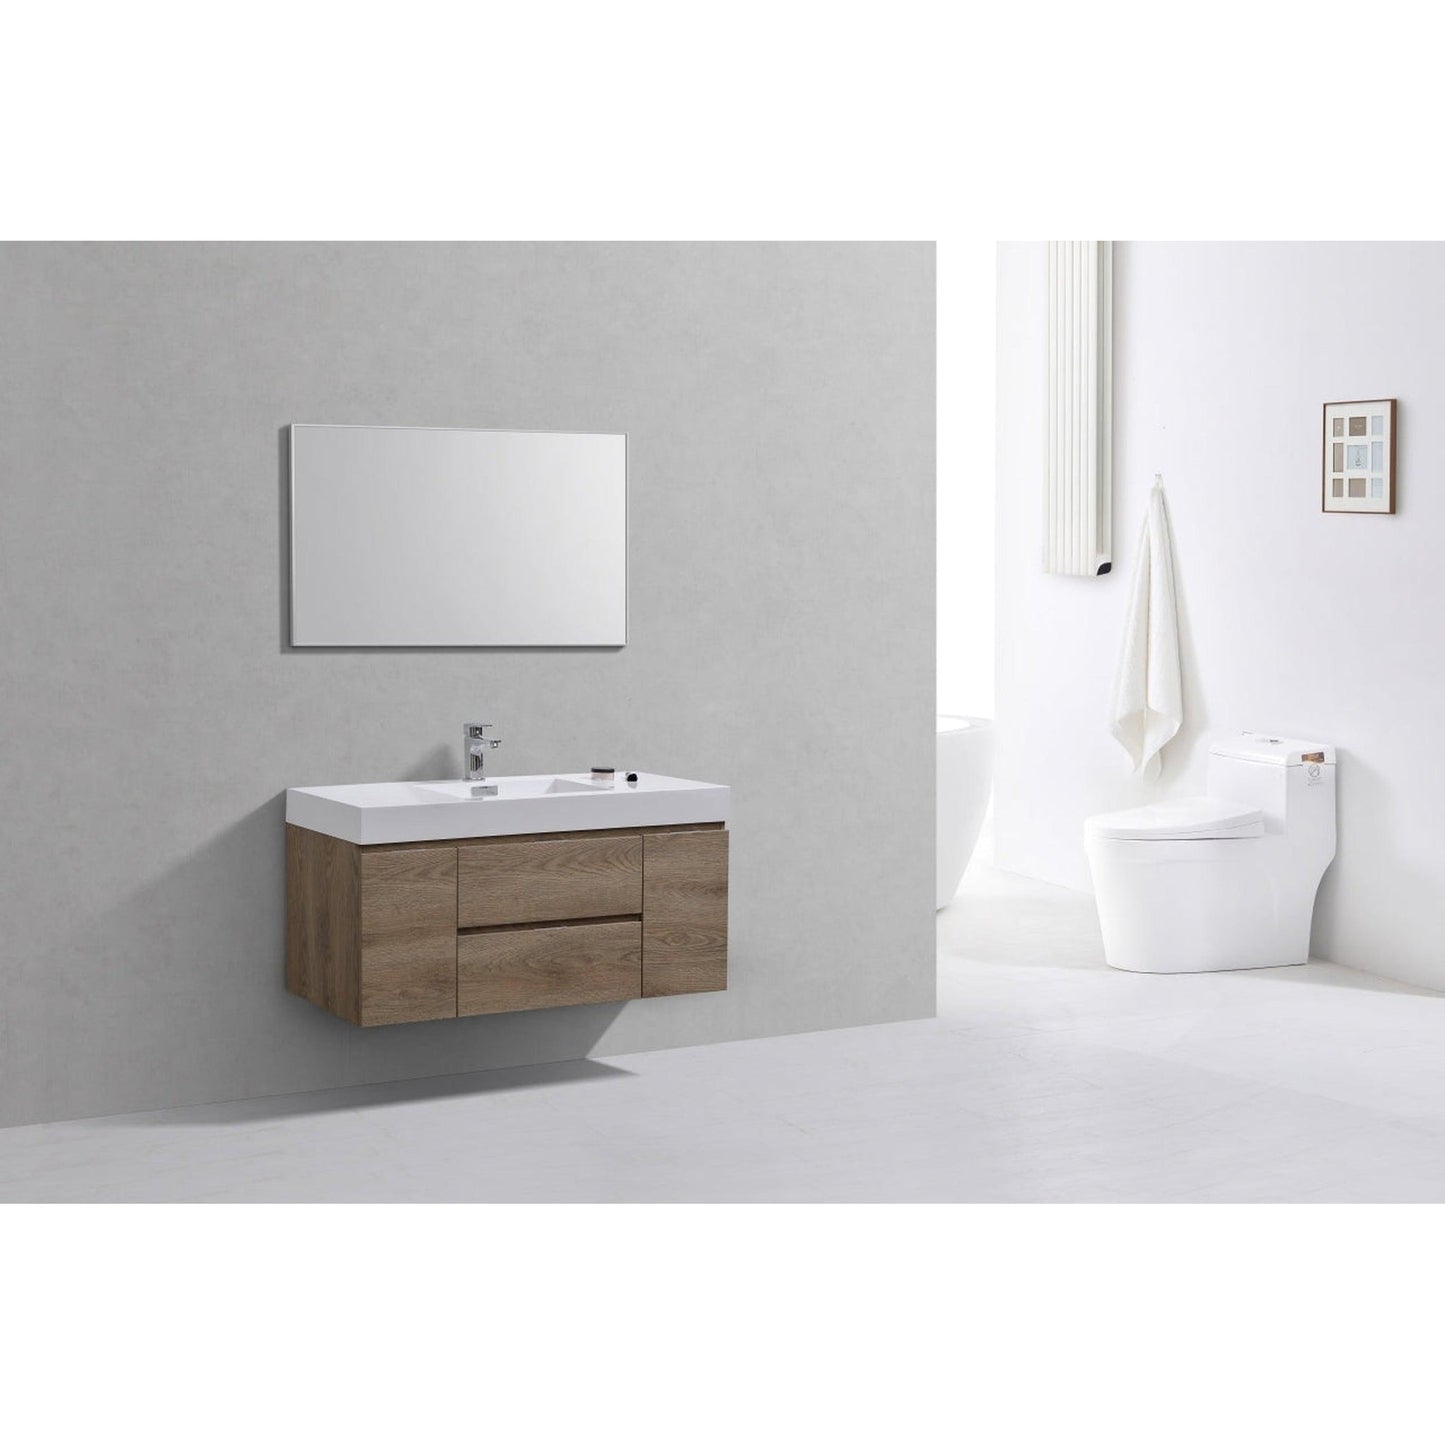 KubeBath Bliss 48" Butternut Wall-Mounted Modern Bathroom Vanity With Single Integrated Acrylic Sink With Overflow and 48" Butternut Framed Mirror With Shelf